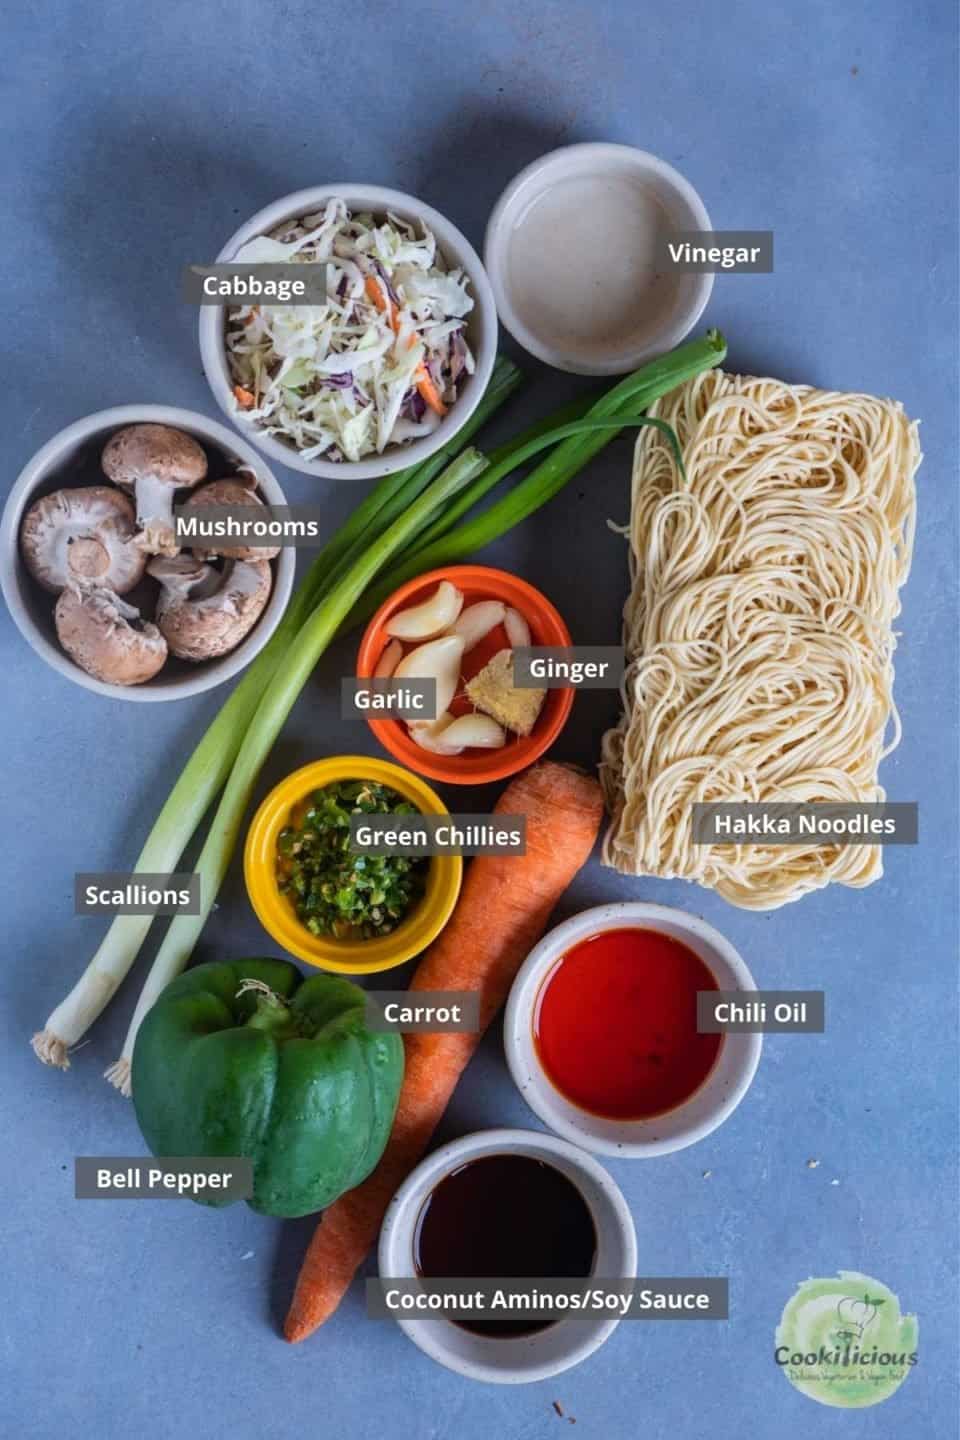 all the ingredients needed to make Veg Hakka Noodles placed on a table with labels on them